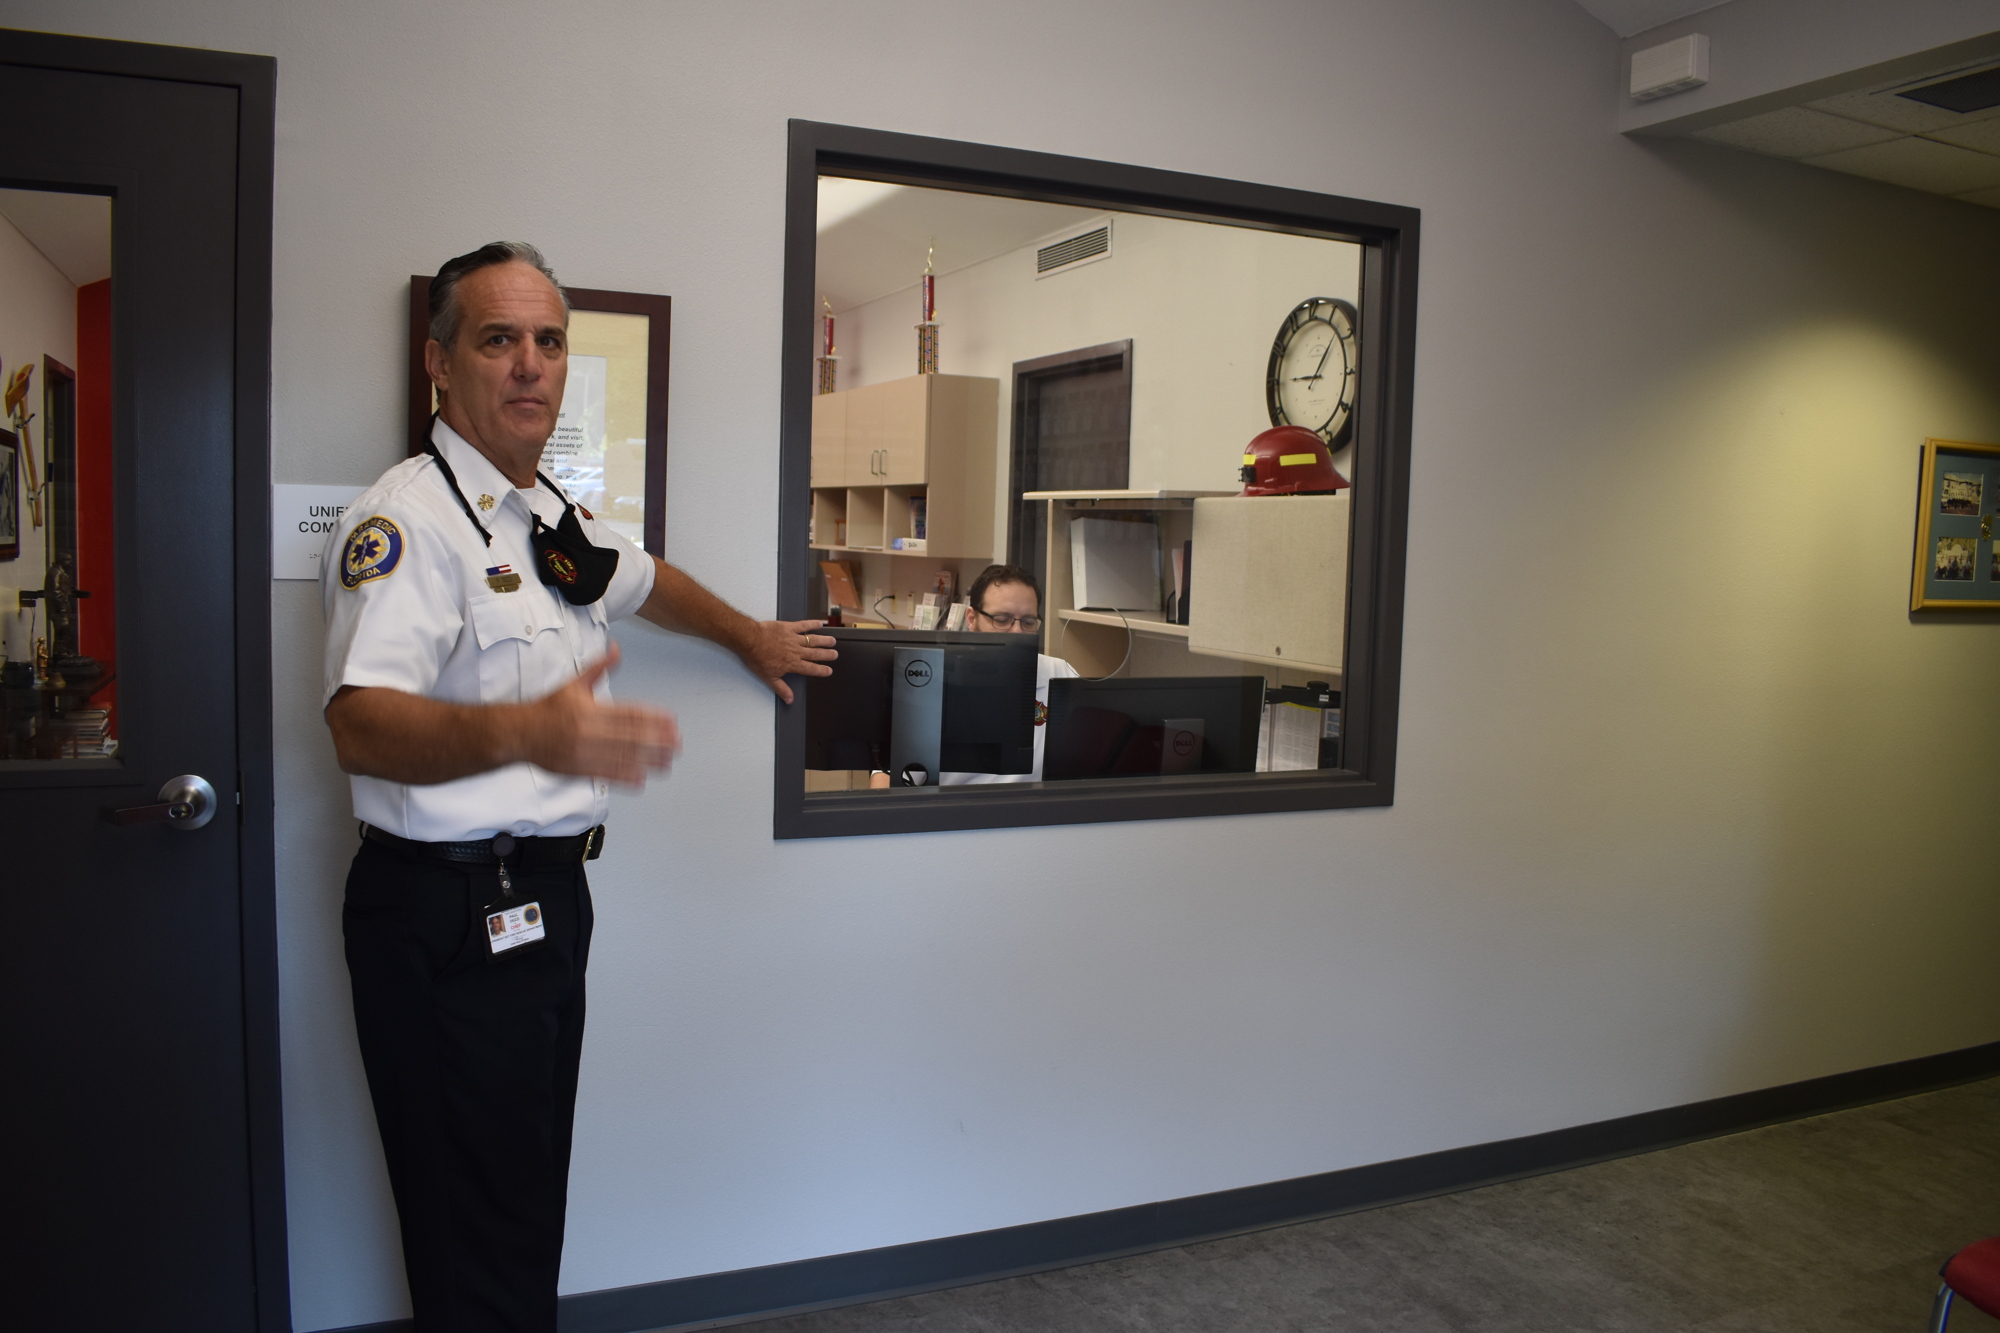 Fire Station 91's entrance has a waiting area for the public. Here Fire Chief Paul Dezzi is pictured next to Fire Rescue liaison Raymond Burger.